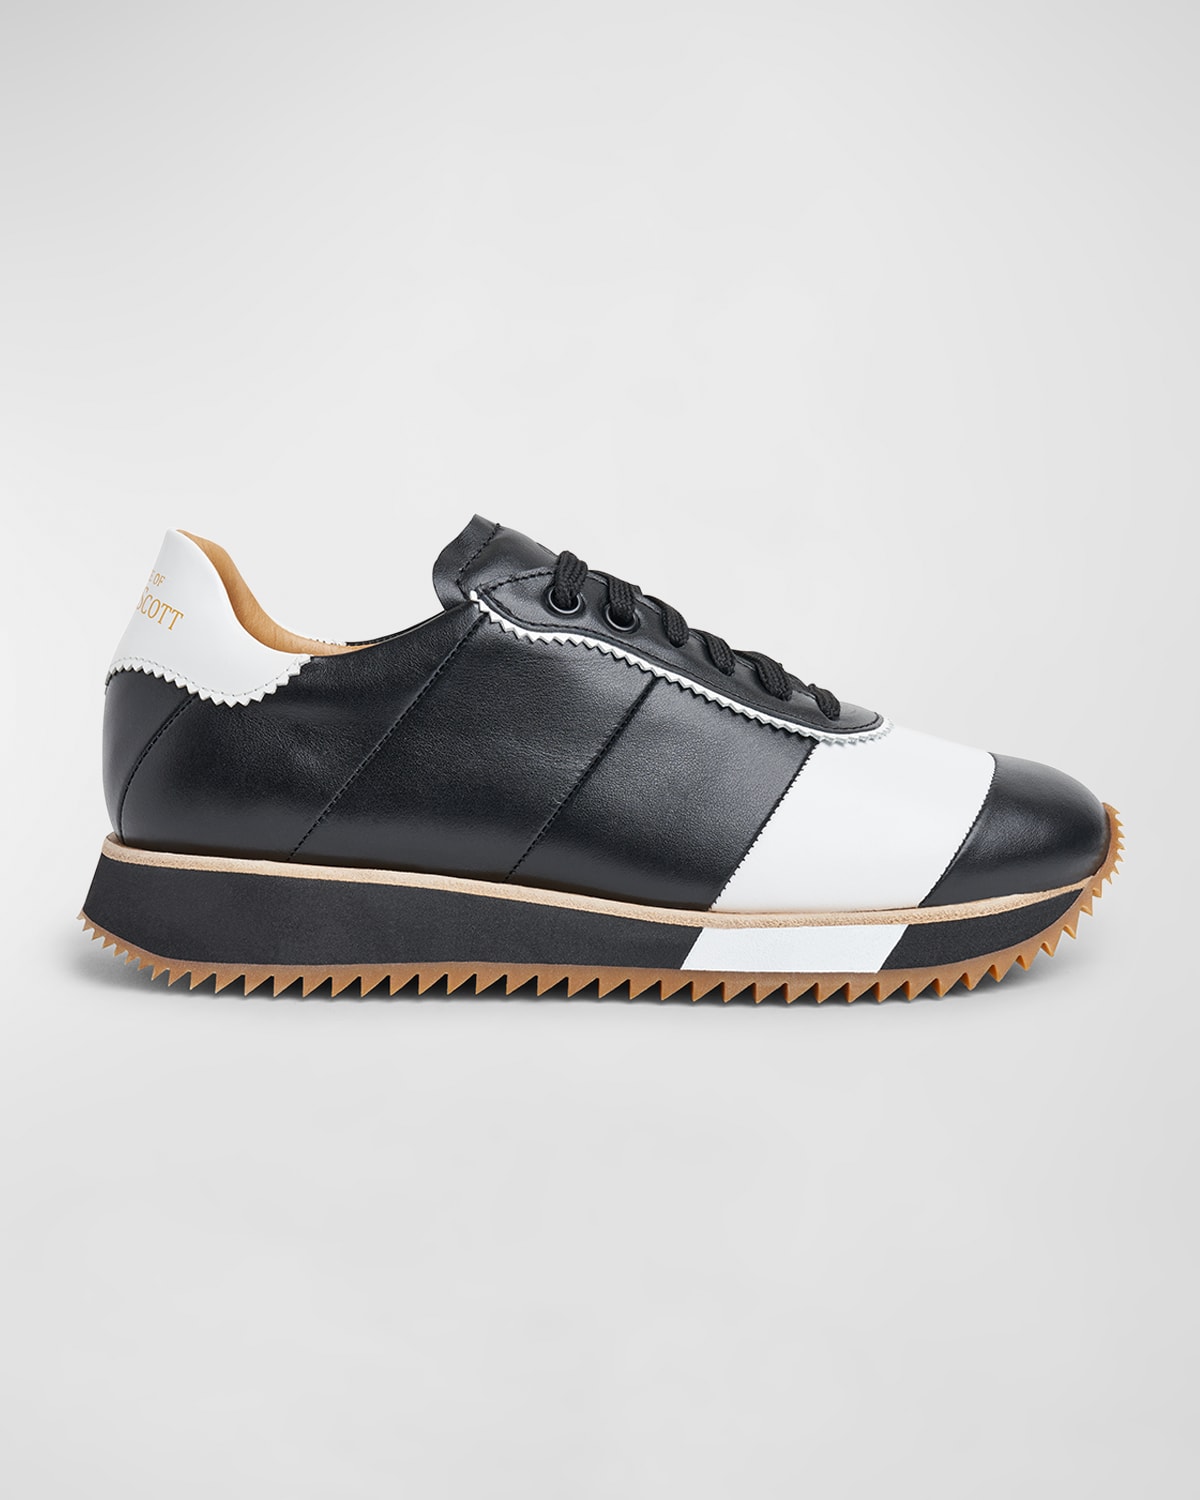 The Quinn Leather Low-Top Sneakers